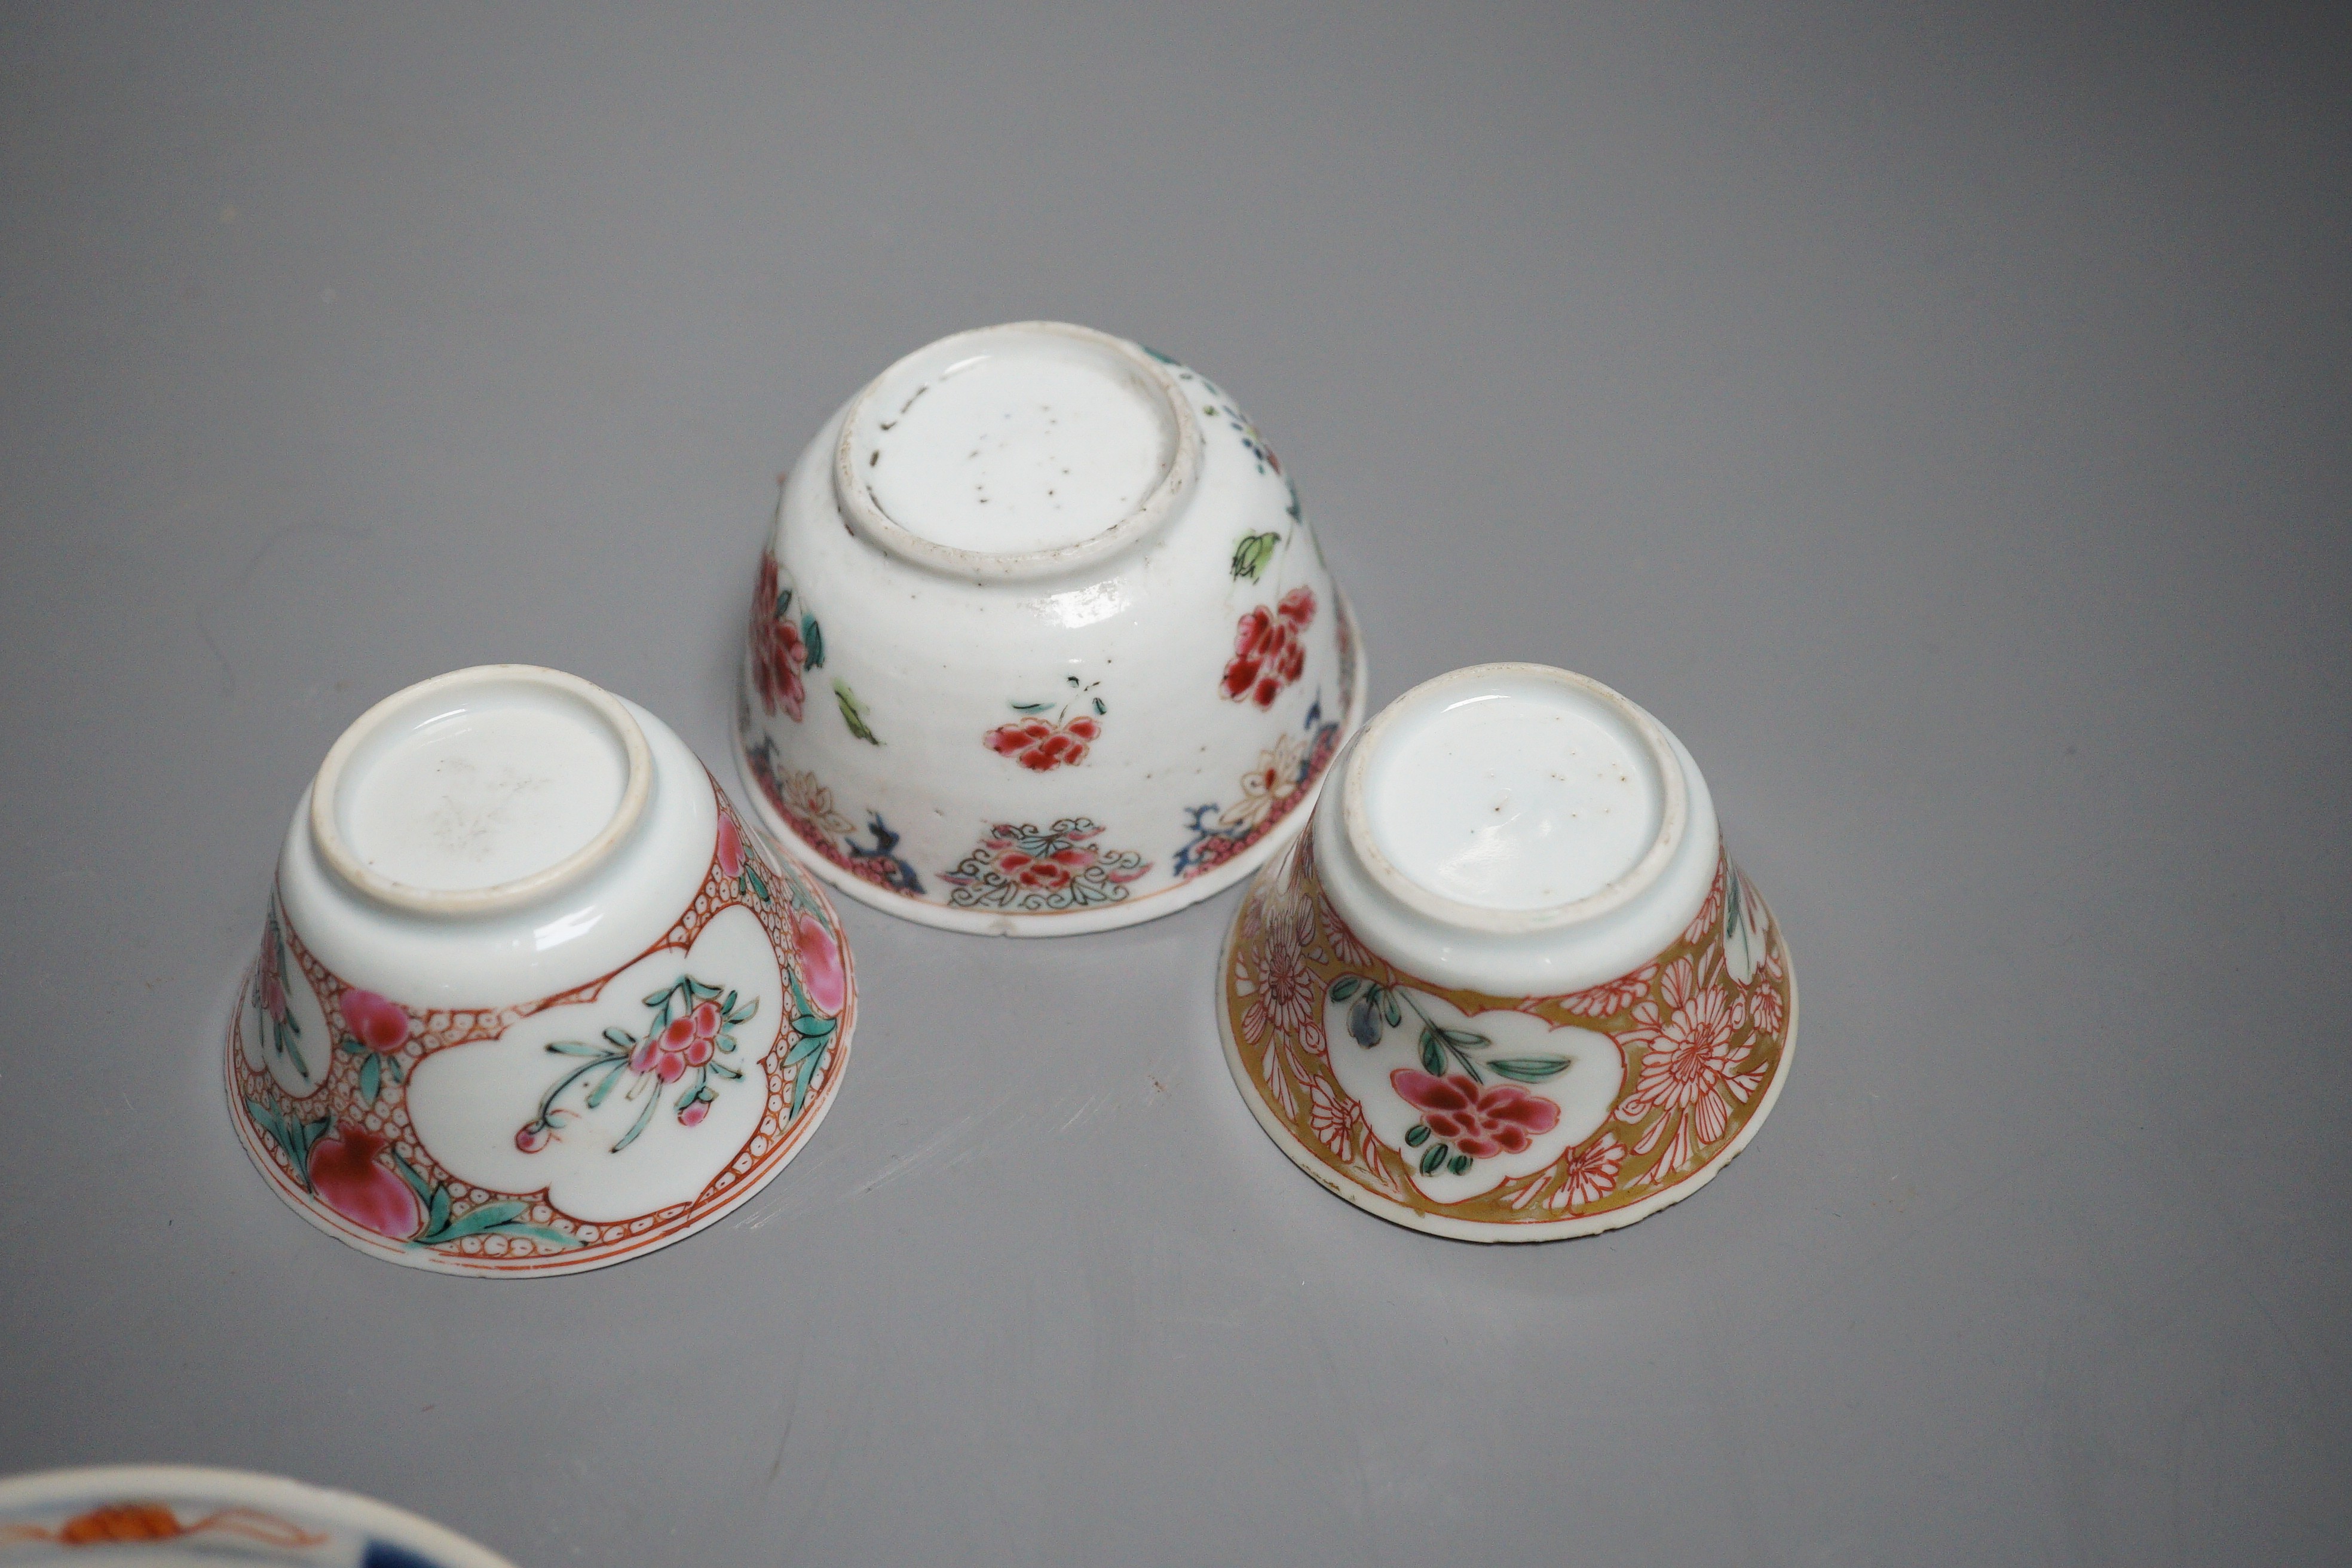 Assorted 18th century Chinese export teabowls, cups and saucers (10)